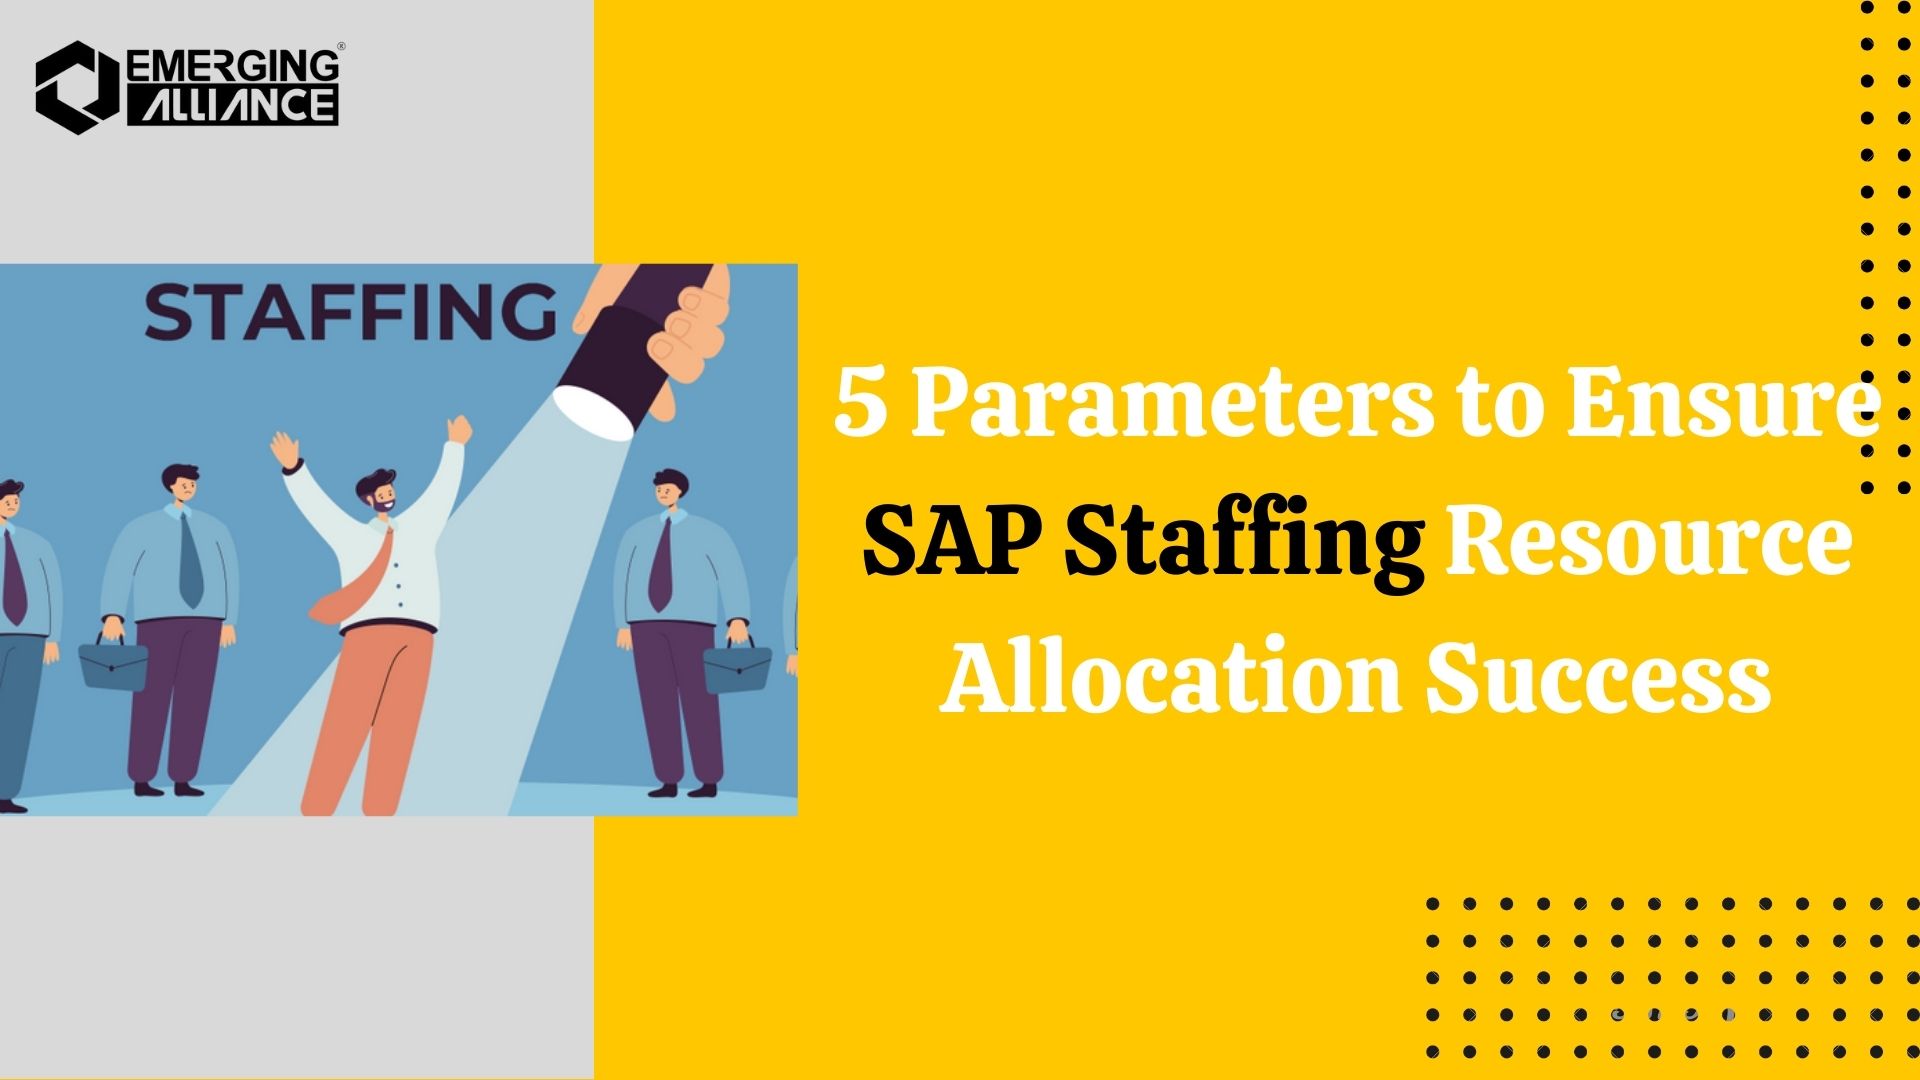 5 parameters for SAP Staffing